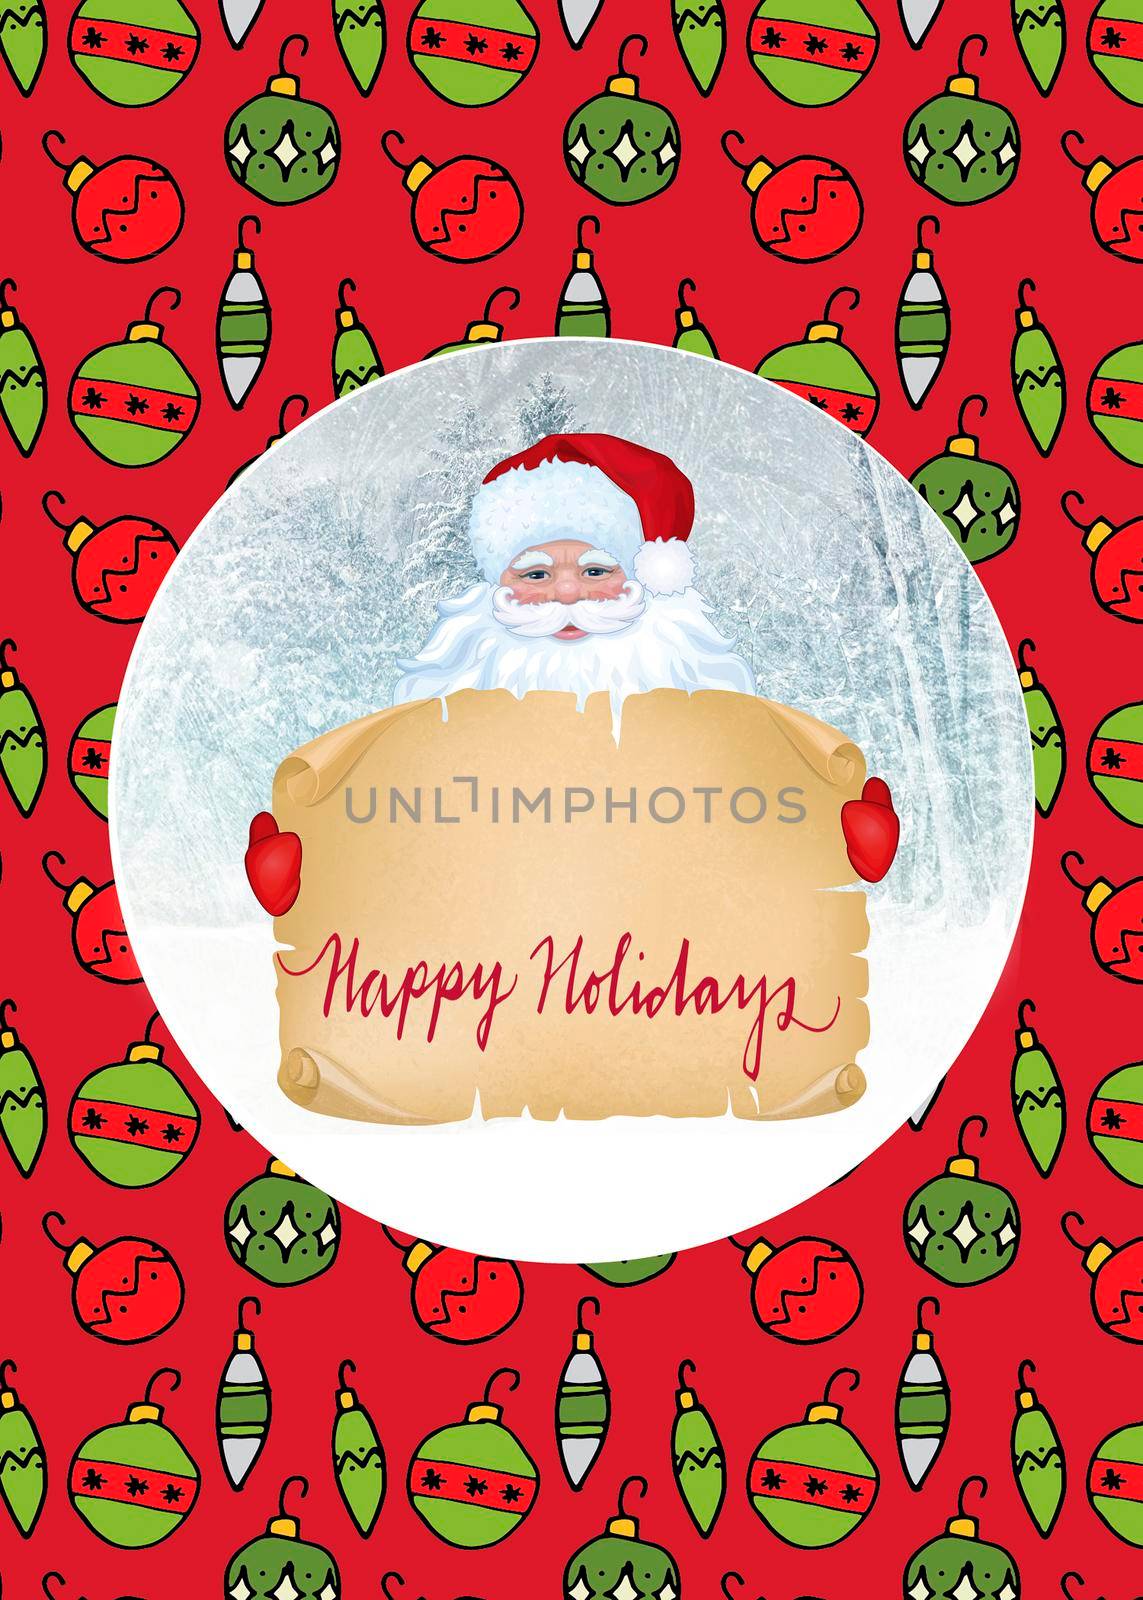 Christmas and new year card with the image of Santa Claus and Christmas decorations on a red background.